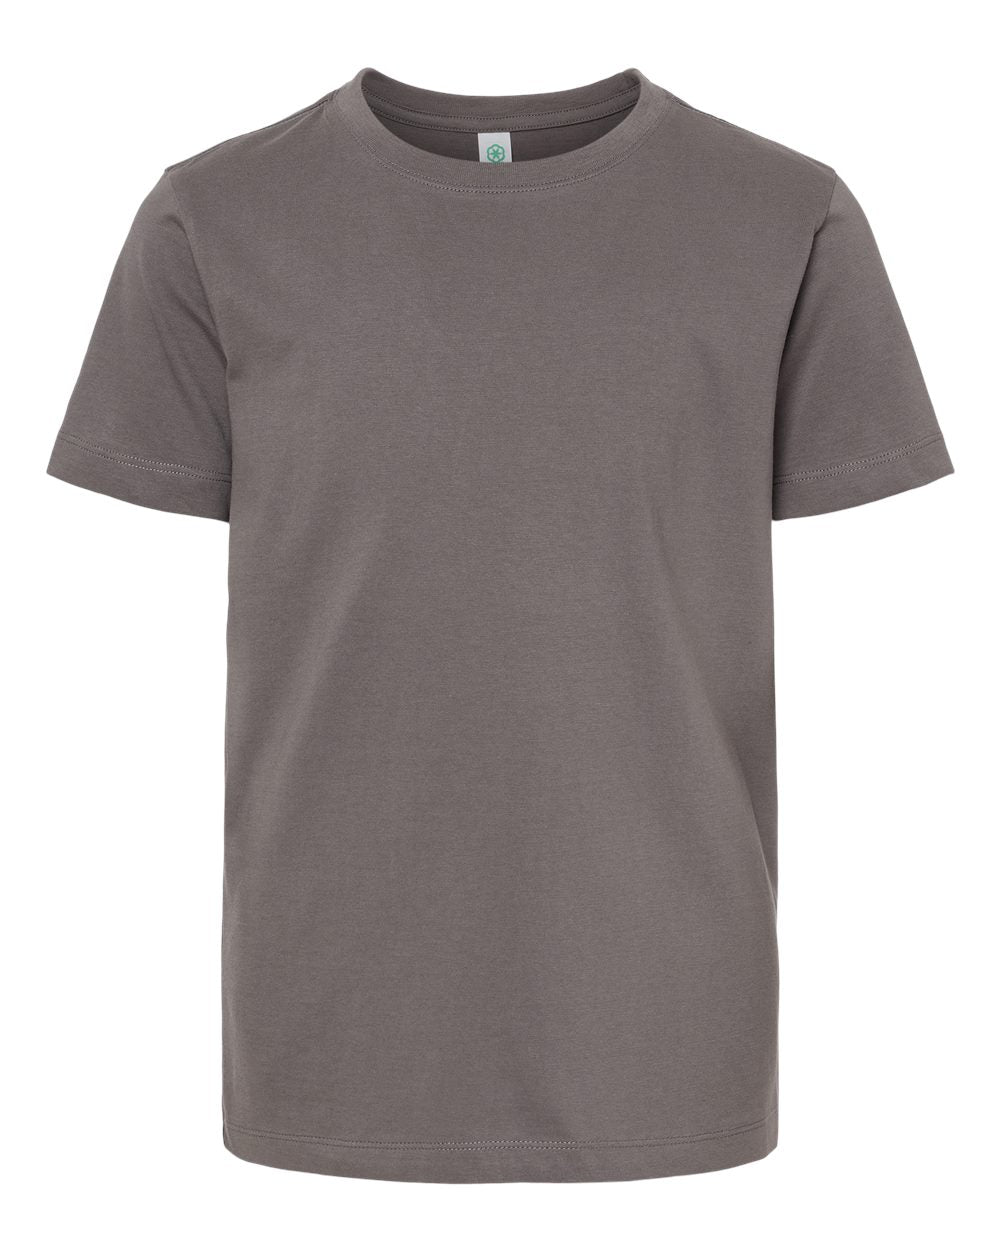 Softshirts® Youth Organic Cotton T-shirt in gray